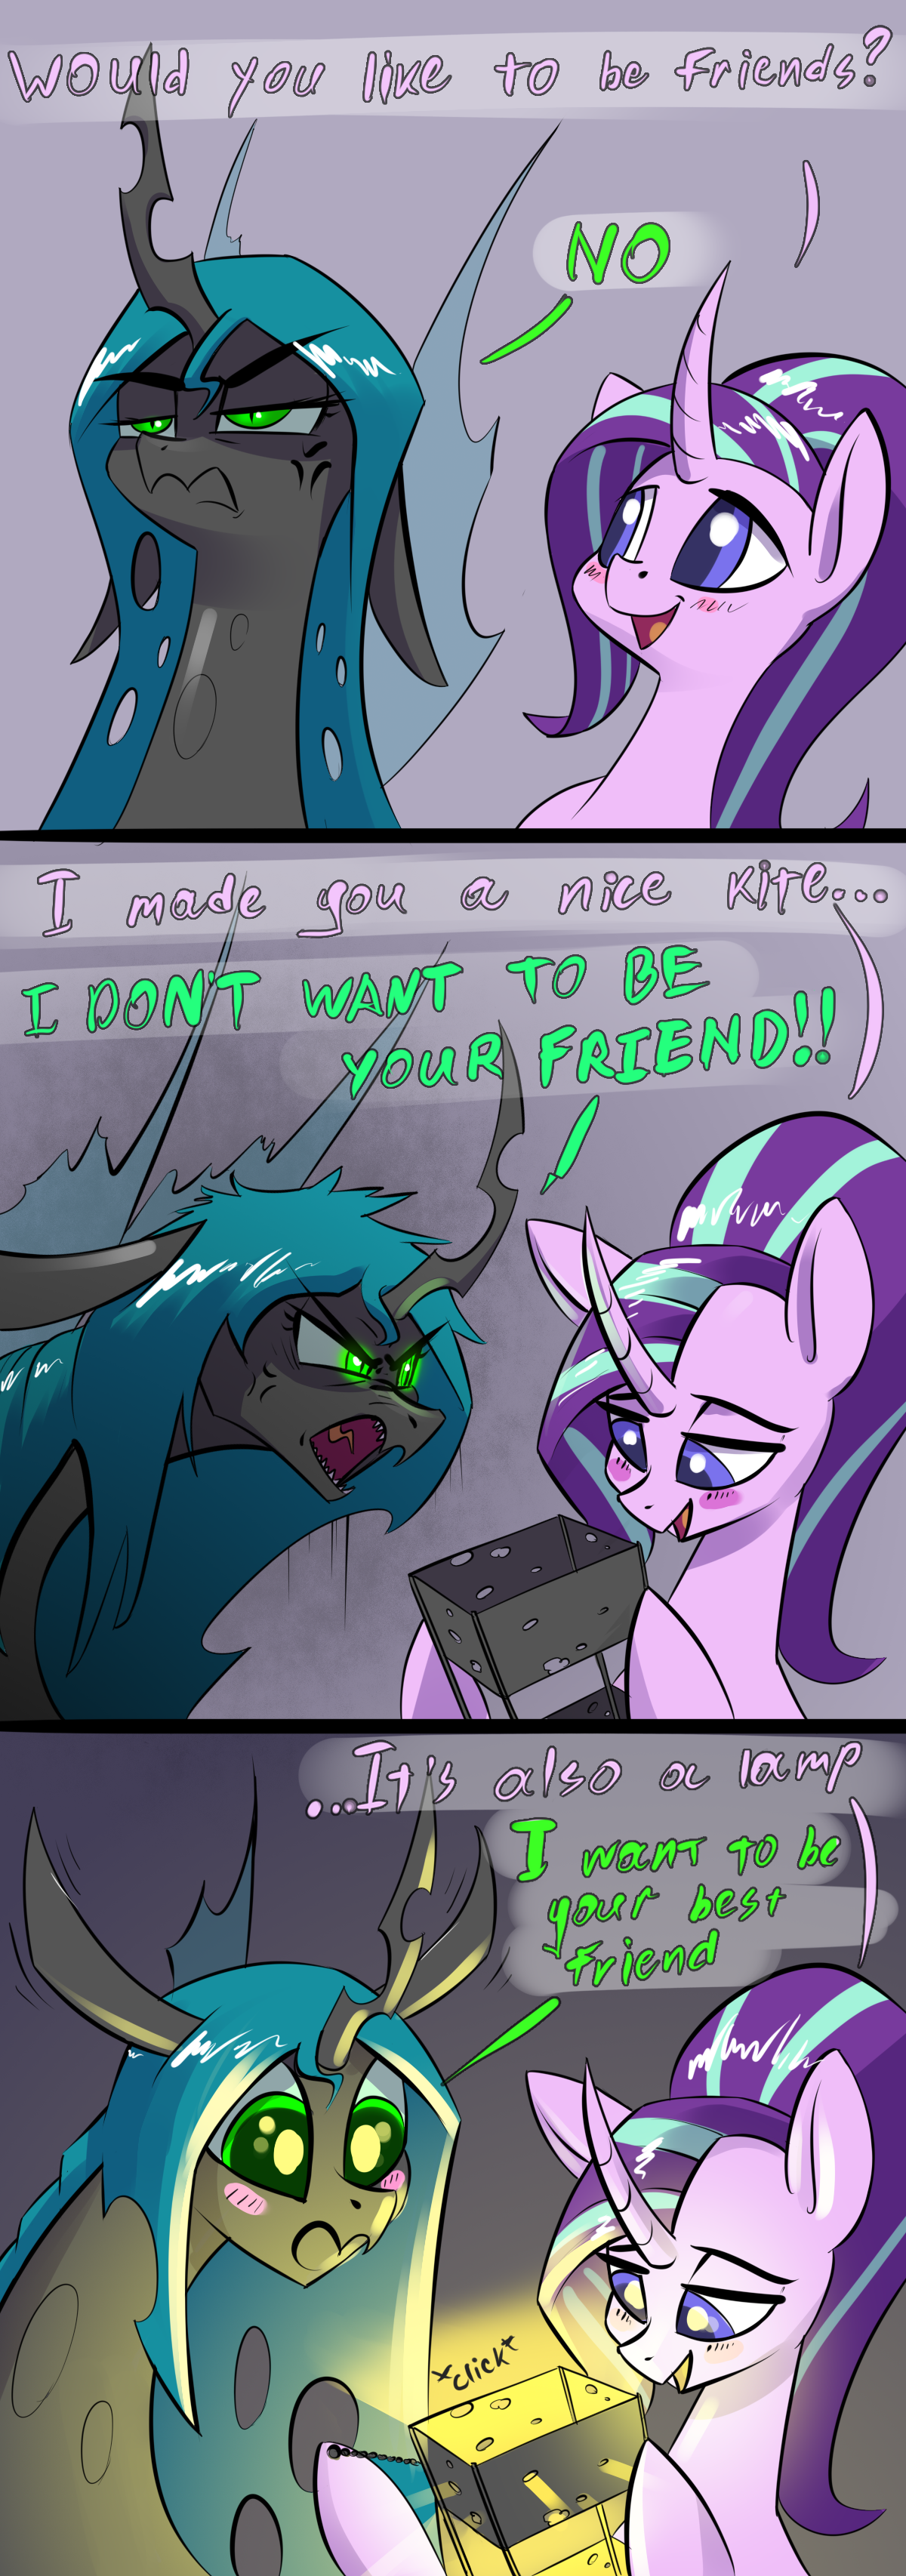 [Obrázek: bff_by_underpable-dcpcoax.png]